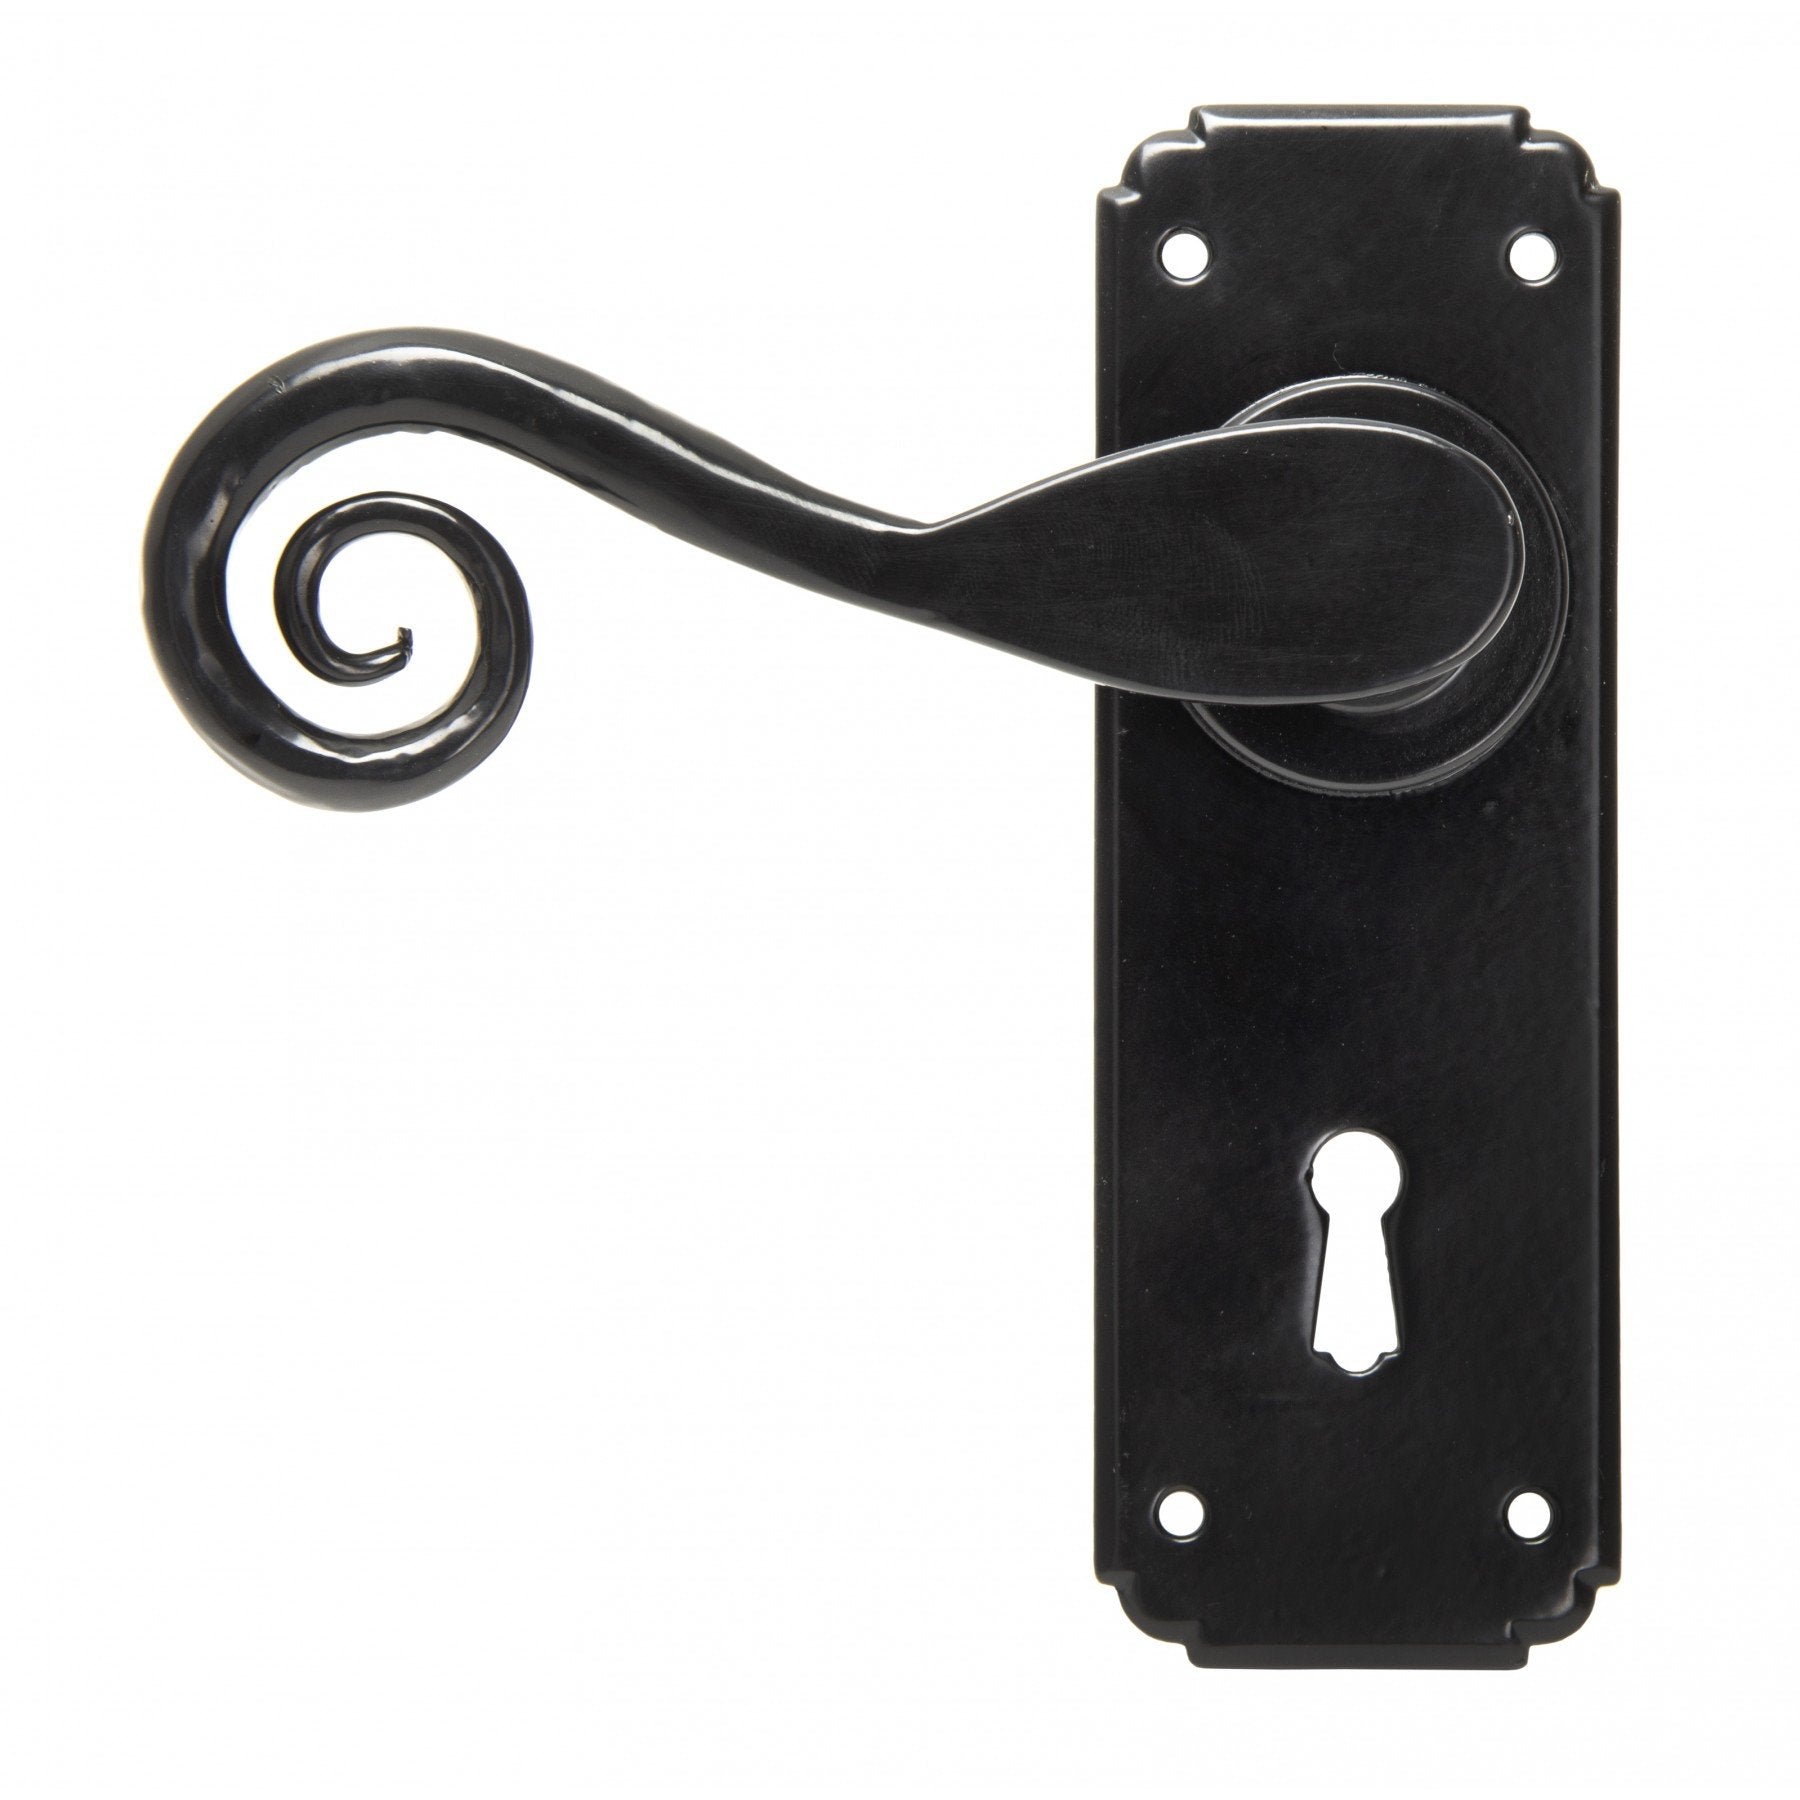 From the Anvil Black Sprung Monkeytail Lever Lock Handle Set